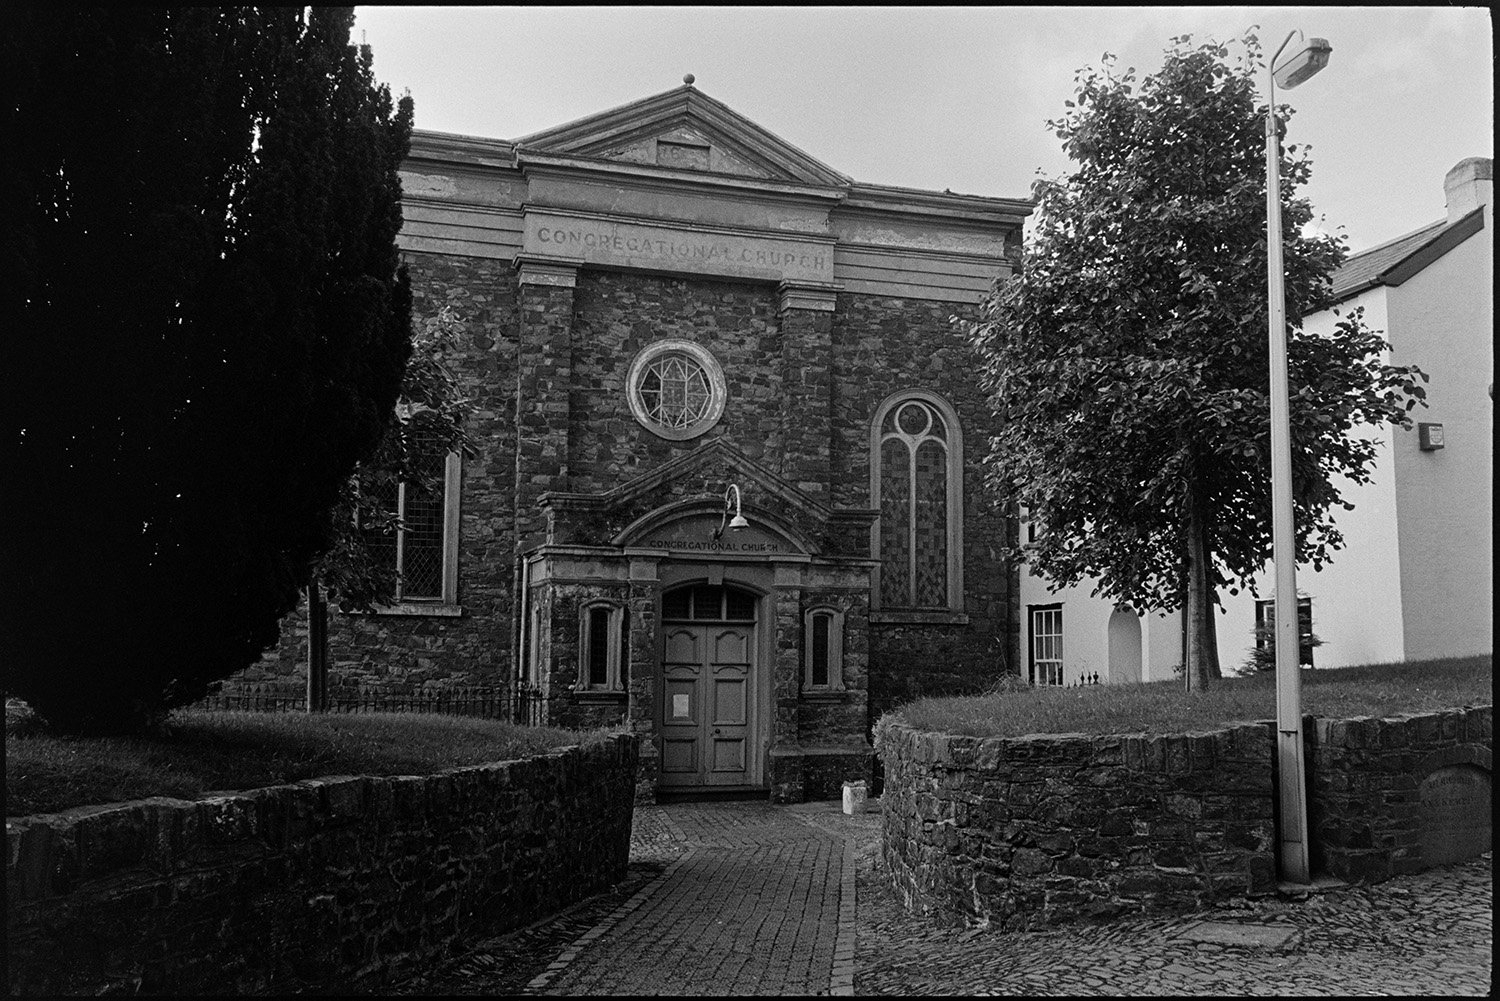 Chapel building. 
[The front of the Congregational Chapel in South Molton. A cobbled pathway leading to the chapel and stained glass windows are visible.]